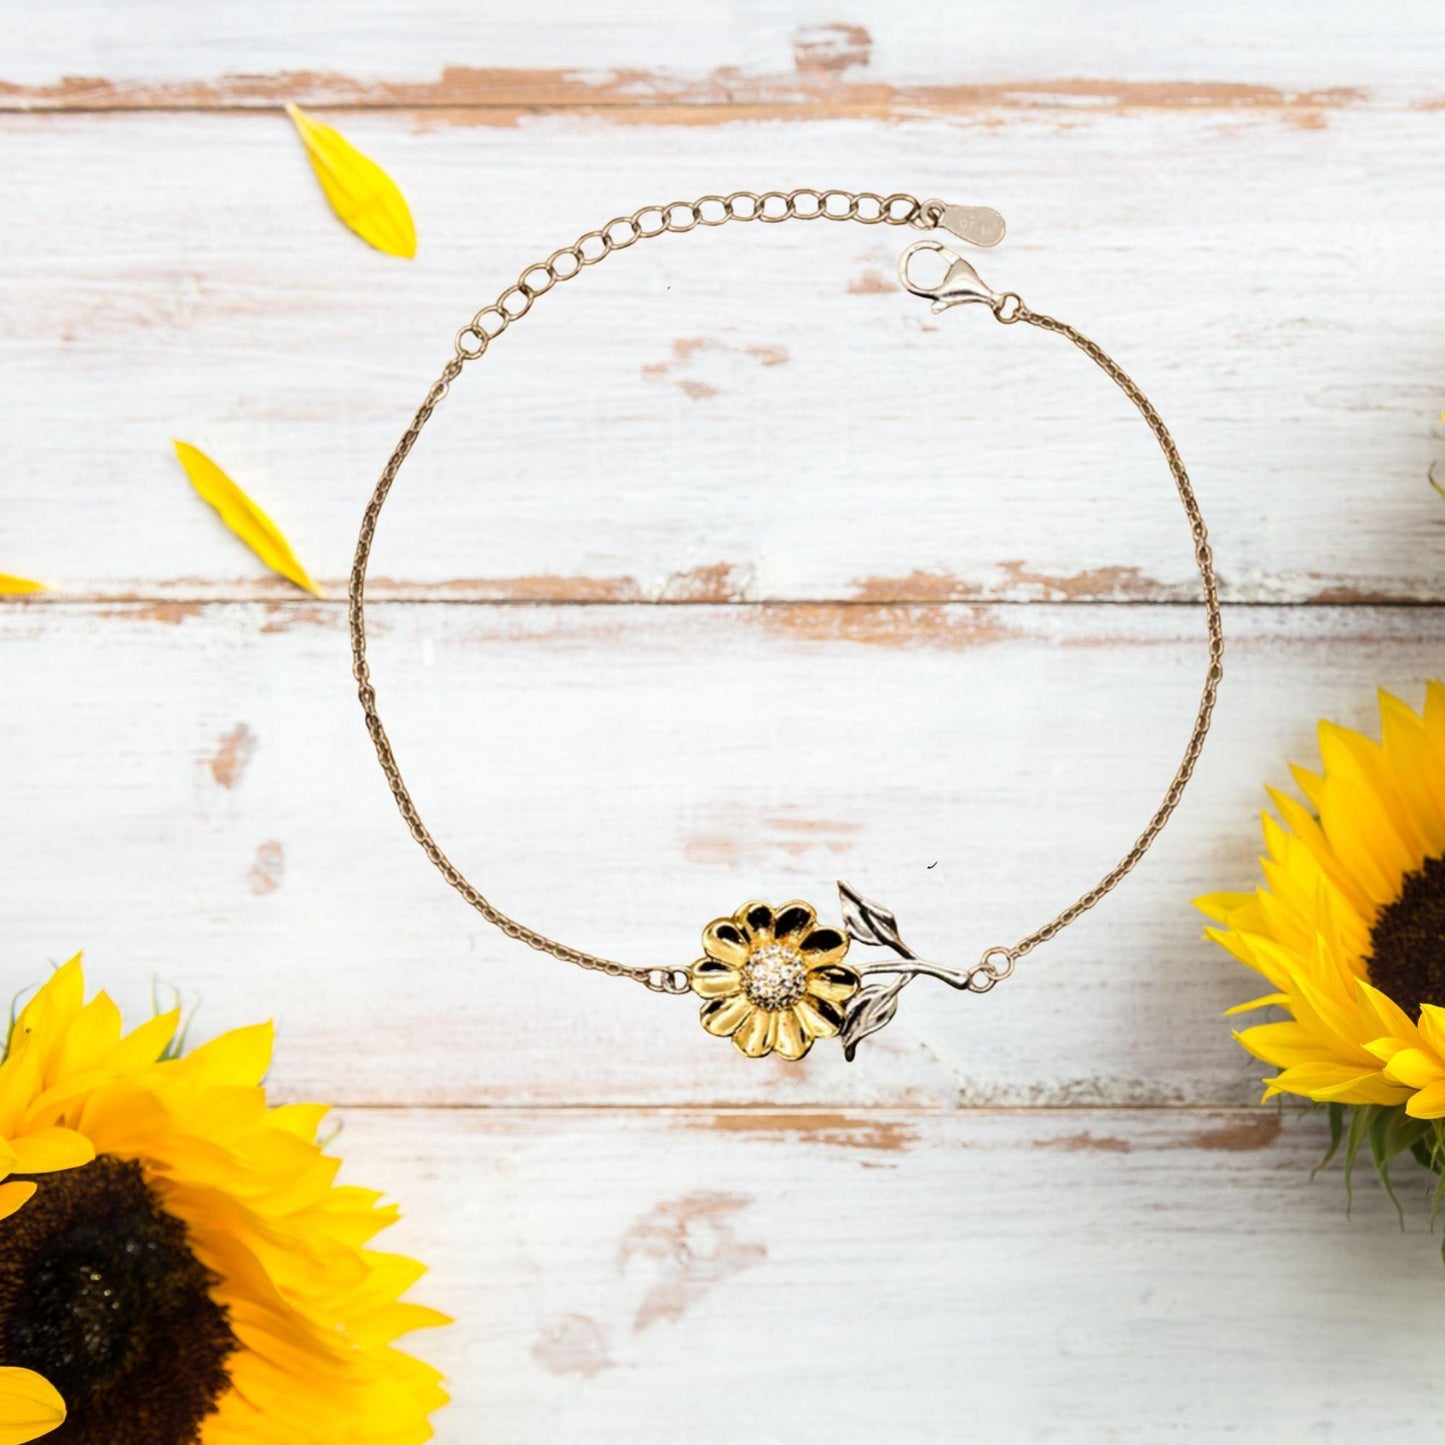 Personal Assistant Sunflower Bracelet - Thanks for being who you are - Birthday Christmas Jewelry Gifts Coworkers Colleague Boss - Mallard Moon Gift Shop